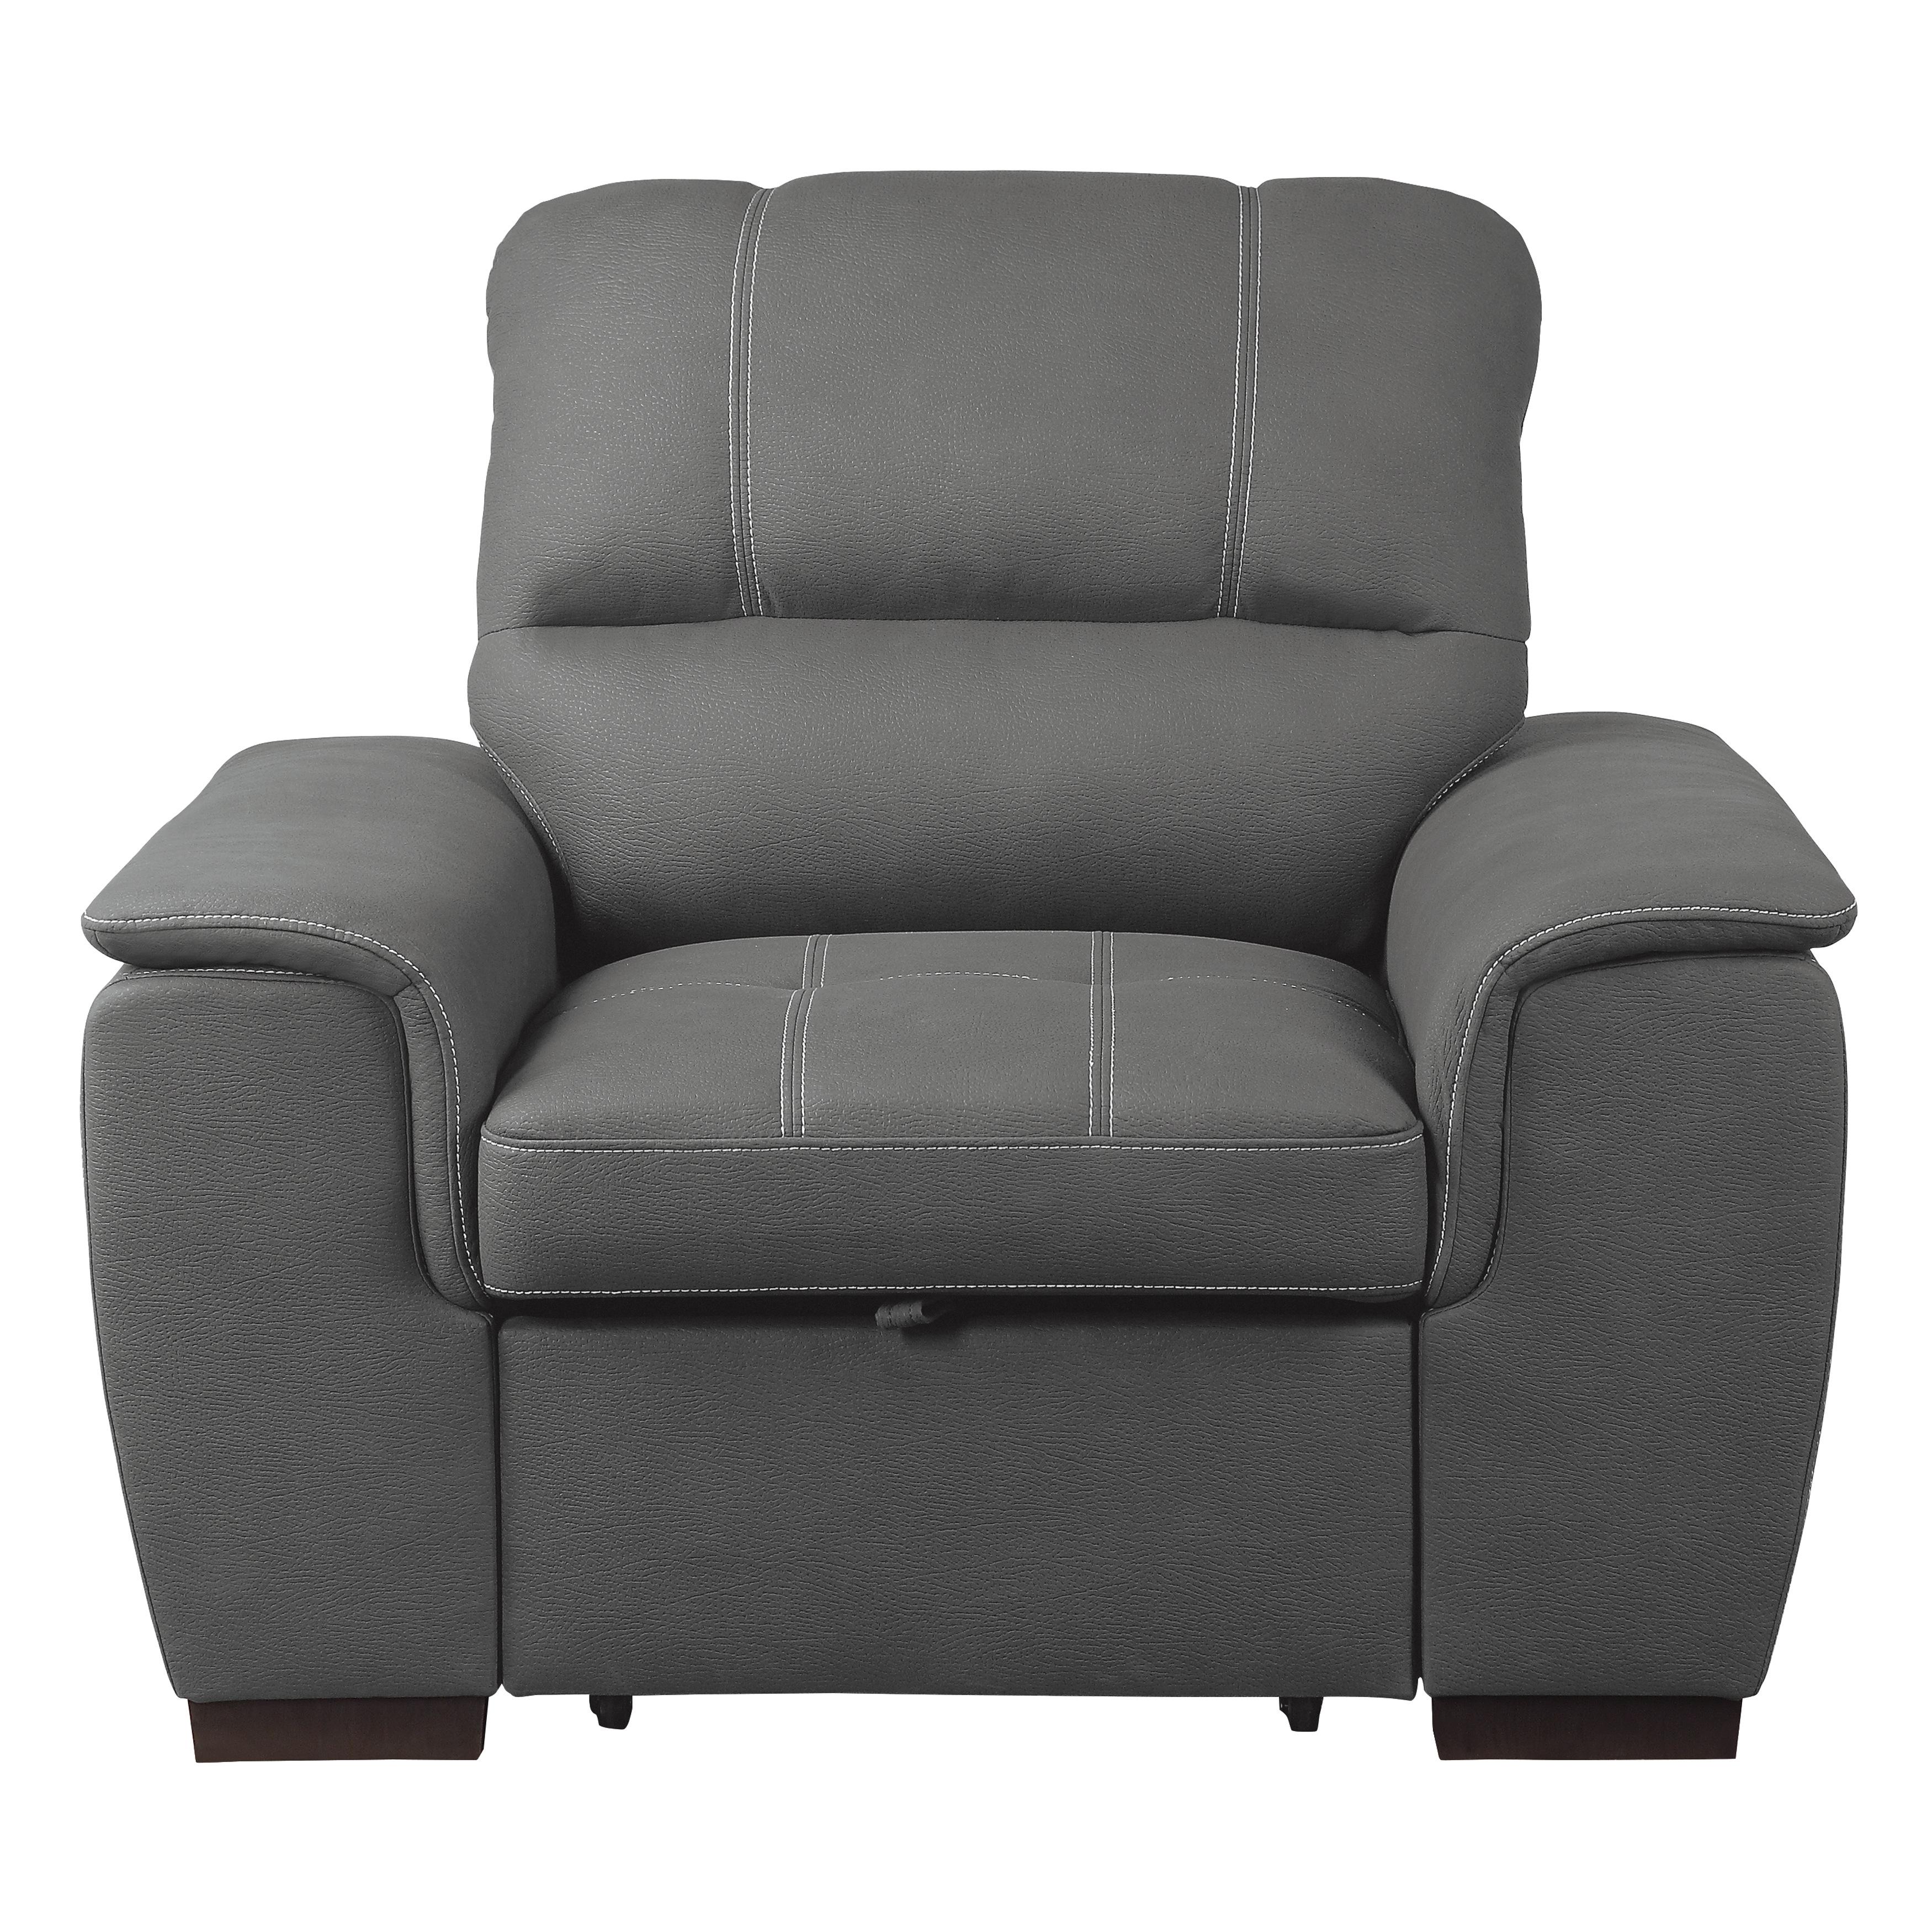 Transitional Arm Chair 9858GY-1 Andes 9858GY-1 in Gray Microfiber